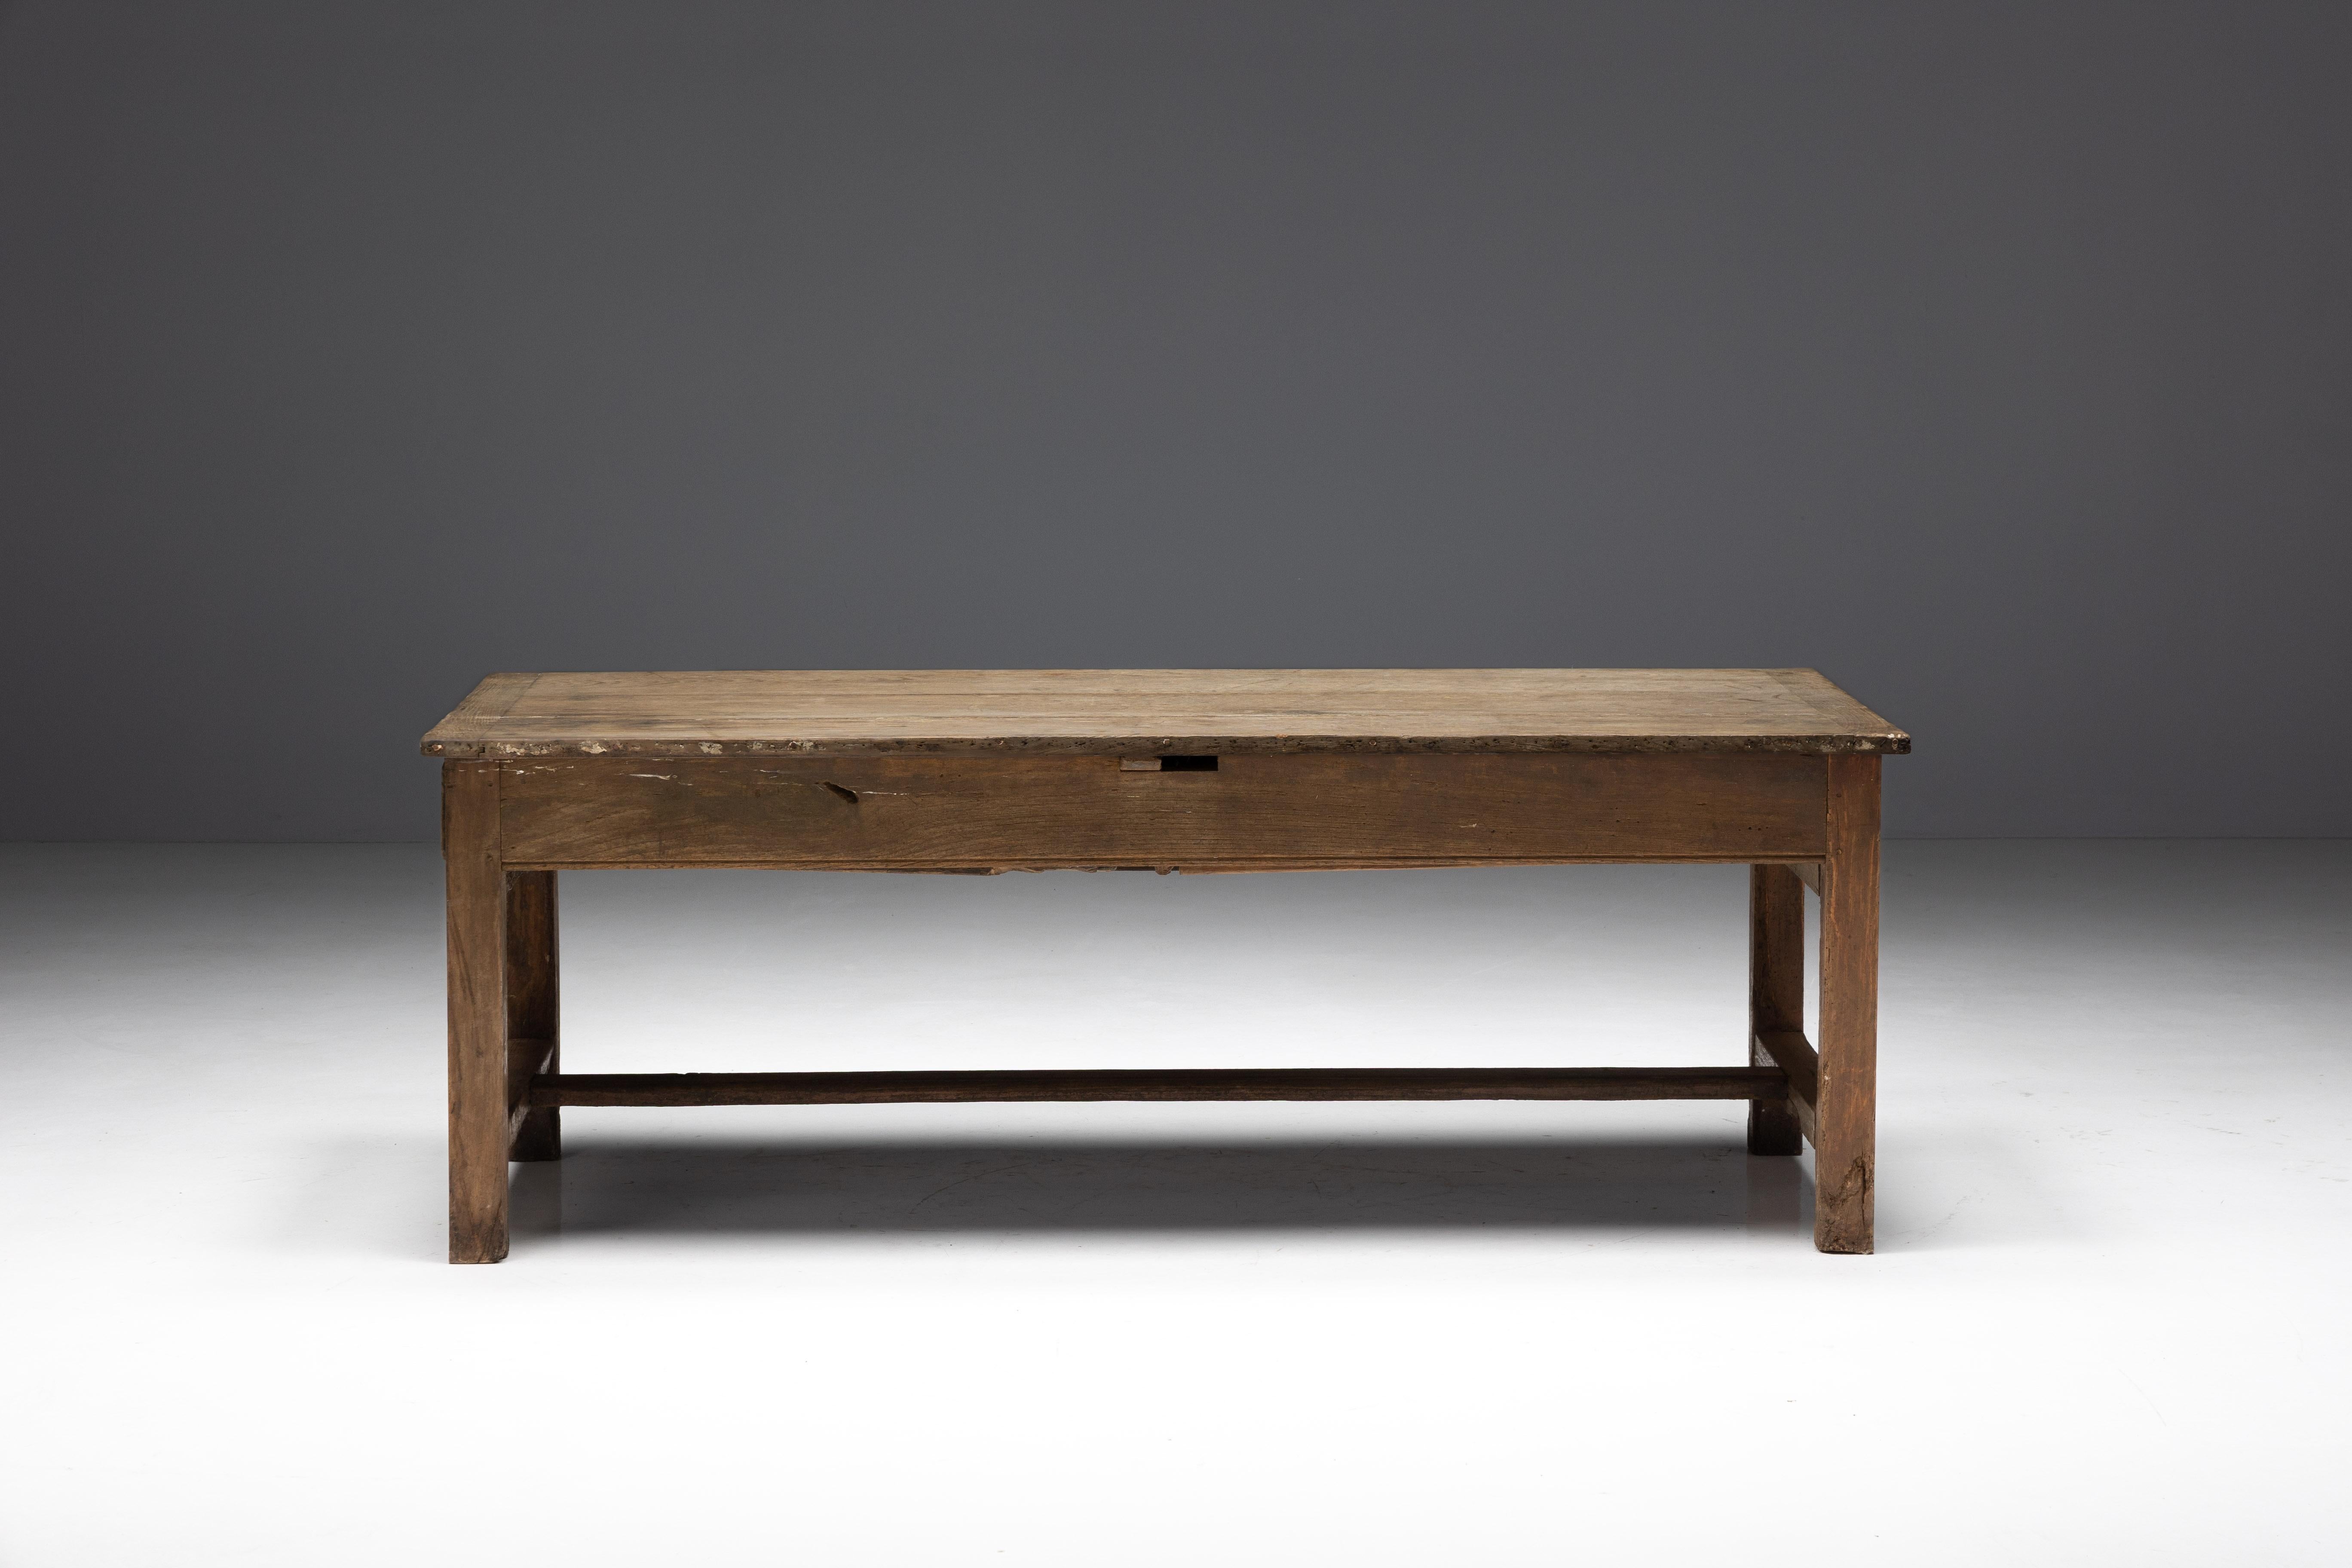 Wood Rustic Art Populaire Dining Table, France, 19th Century For Sale